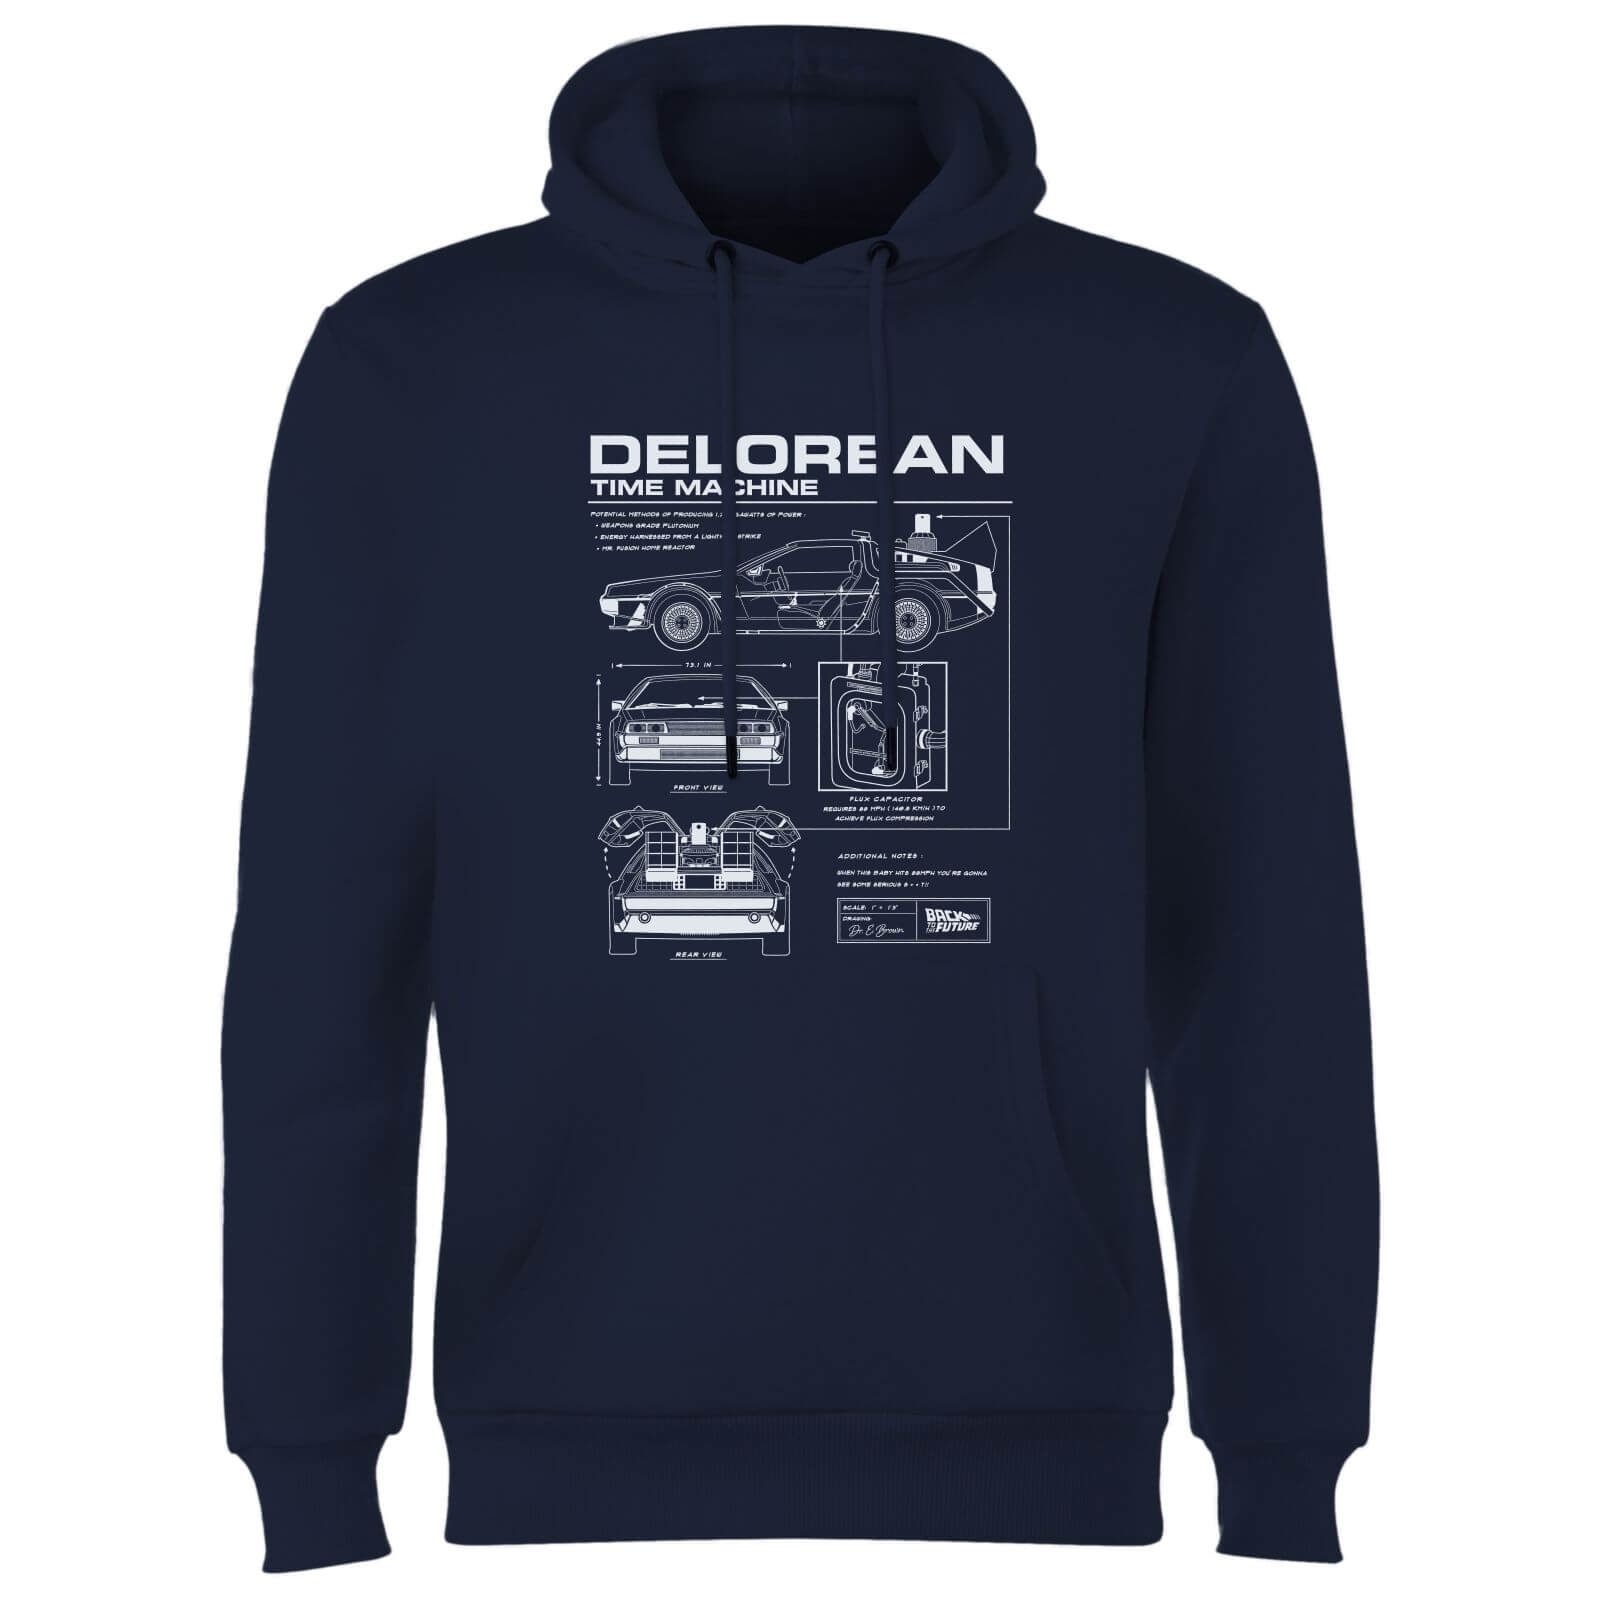 Back to the future Delorian Schematic Hoodie - Navy - S